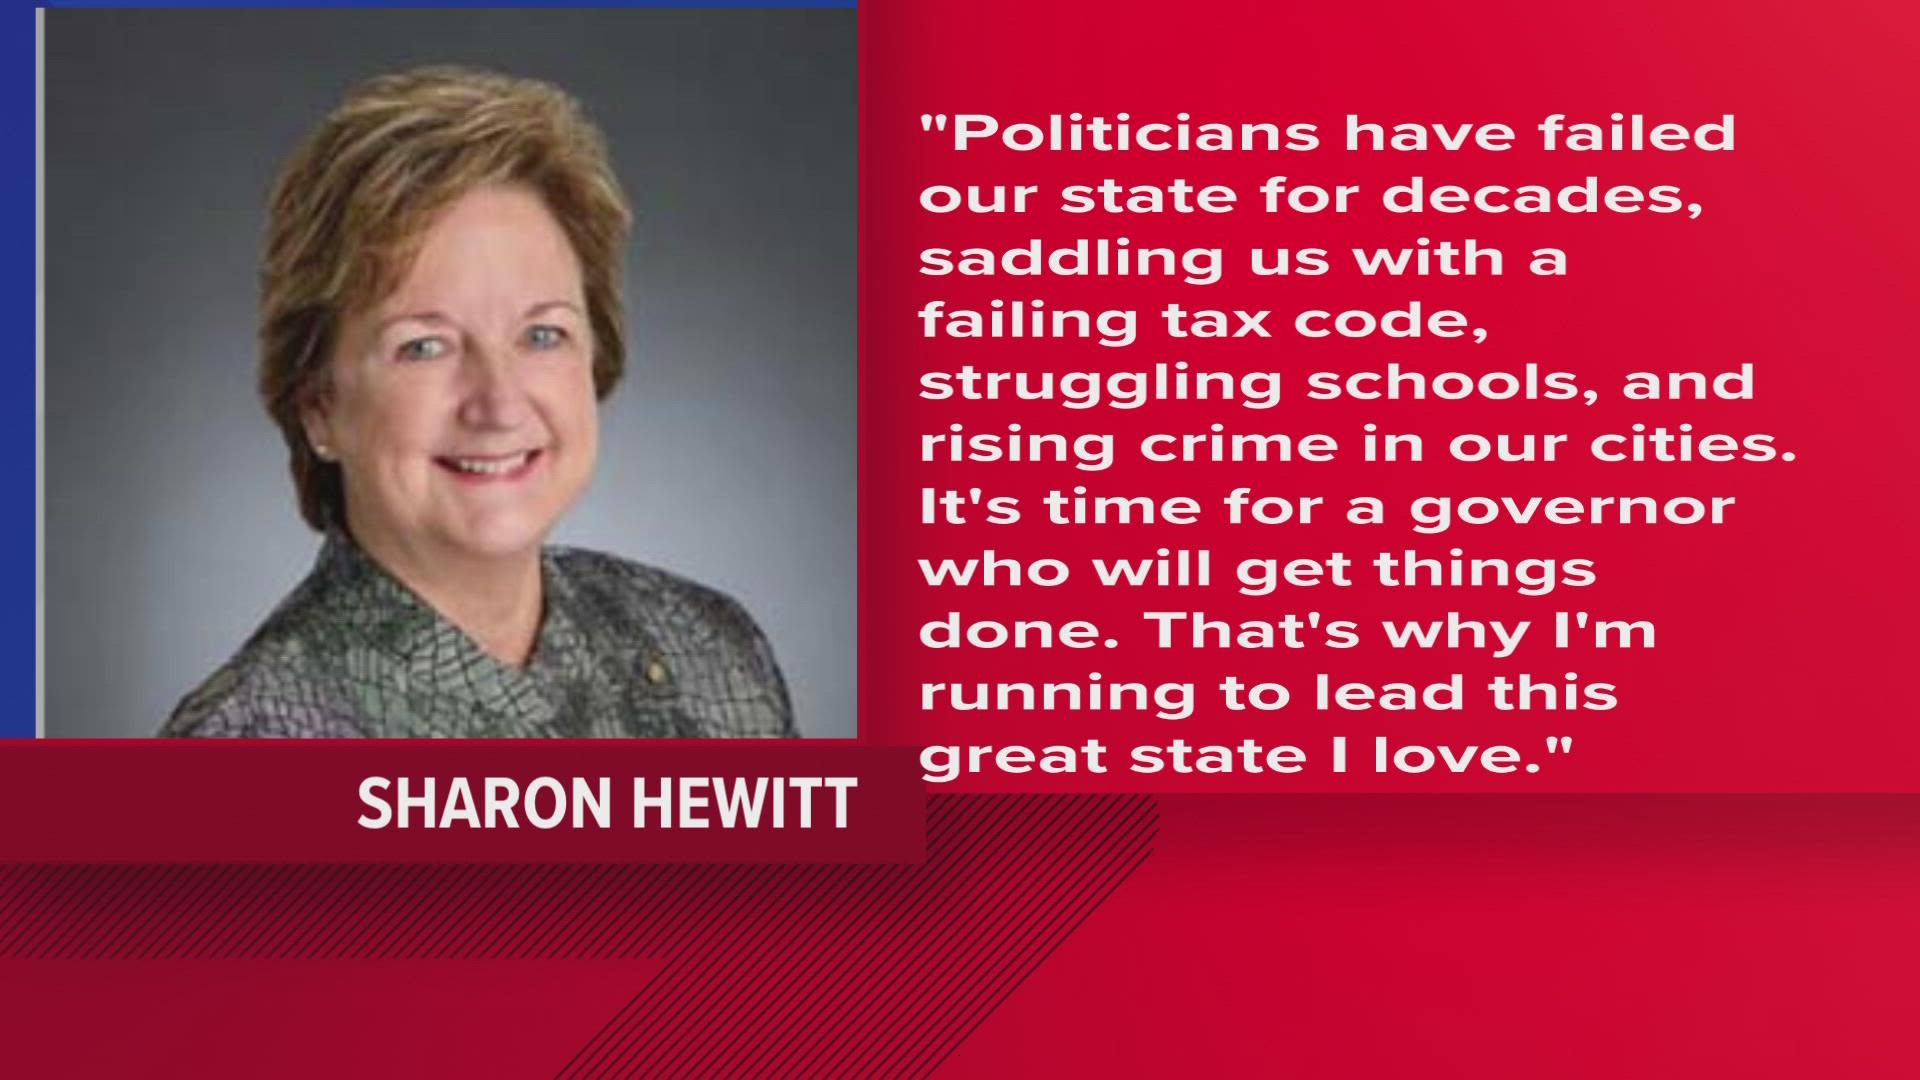 Sen. Sharon Hewitt joins race for state governor.